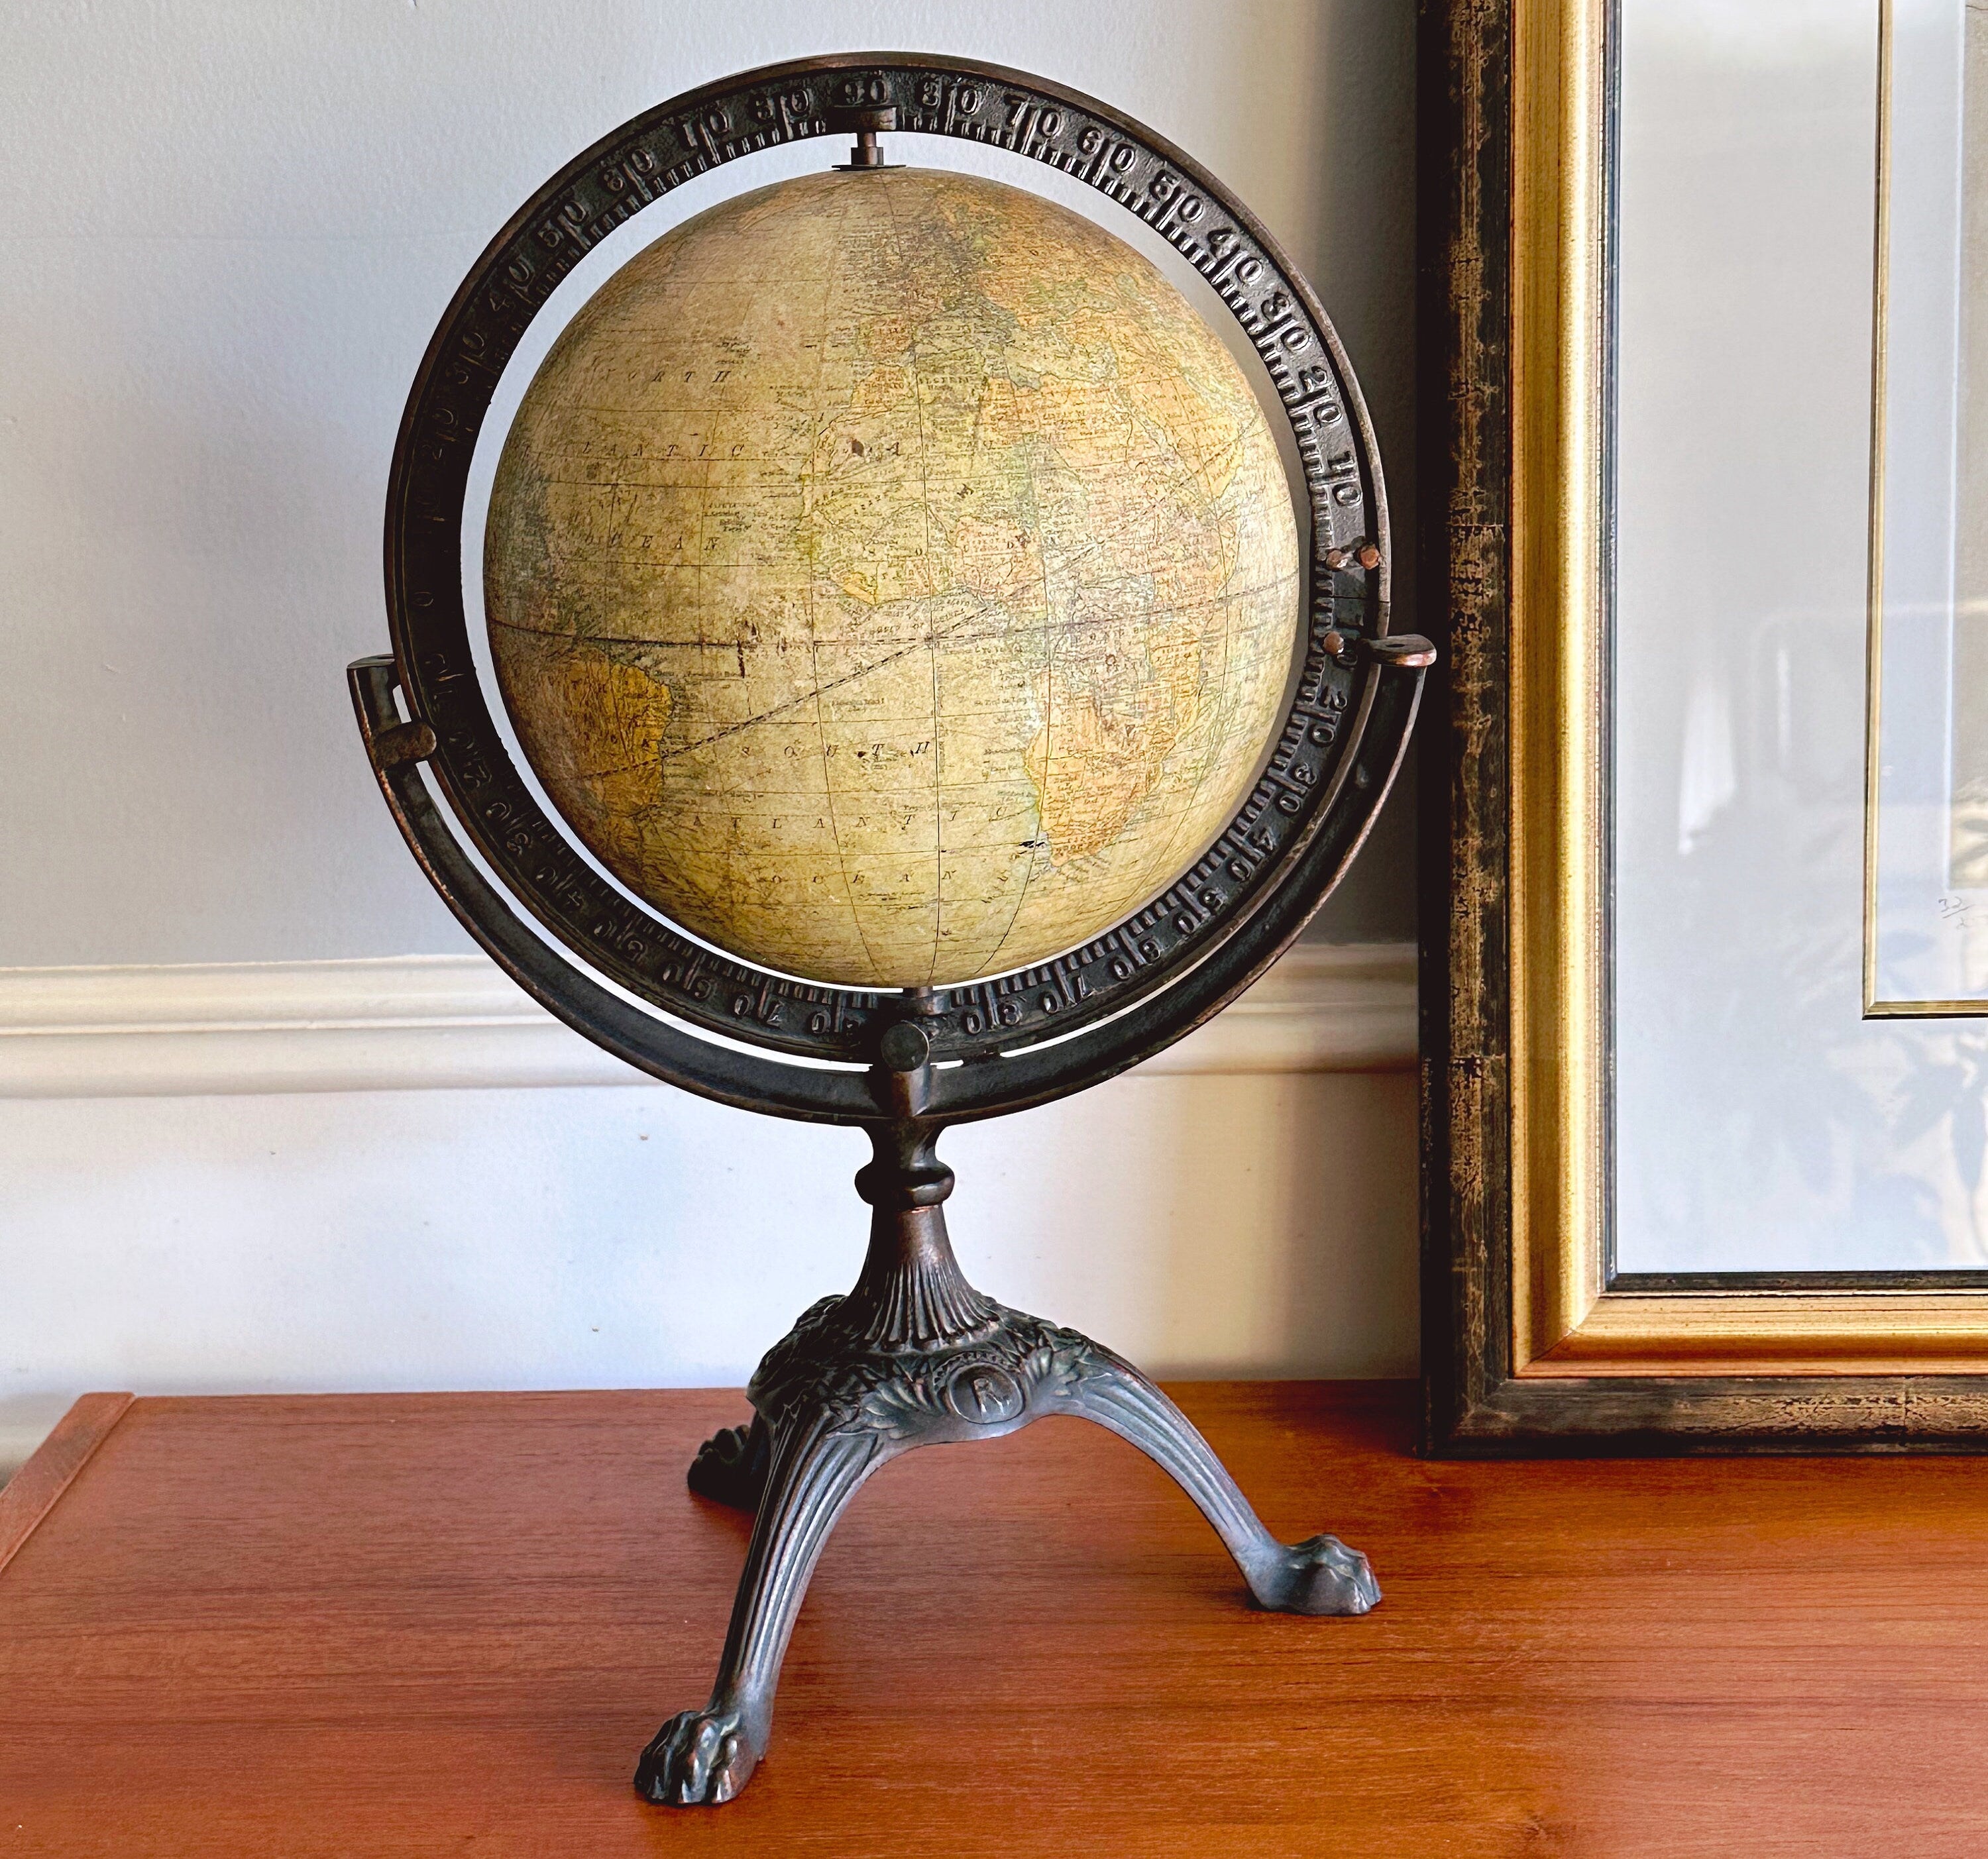 Antique Rand McNally 1920s 9 Inch Terrestrial World Globe with Cast Iron Clawfoot Base | Historical Cartography Collectors Gift Office Decor